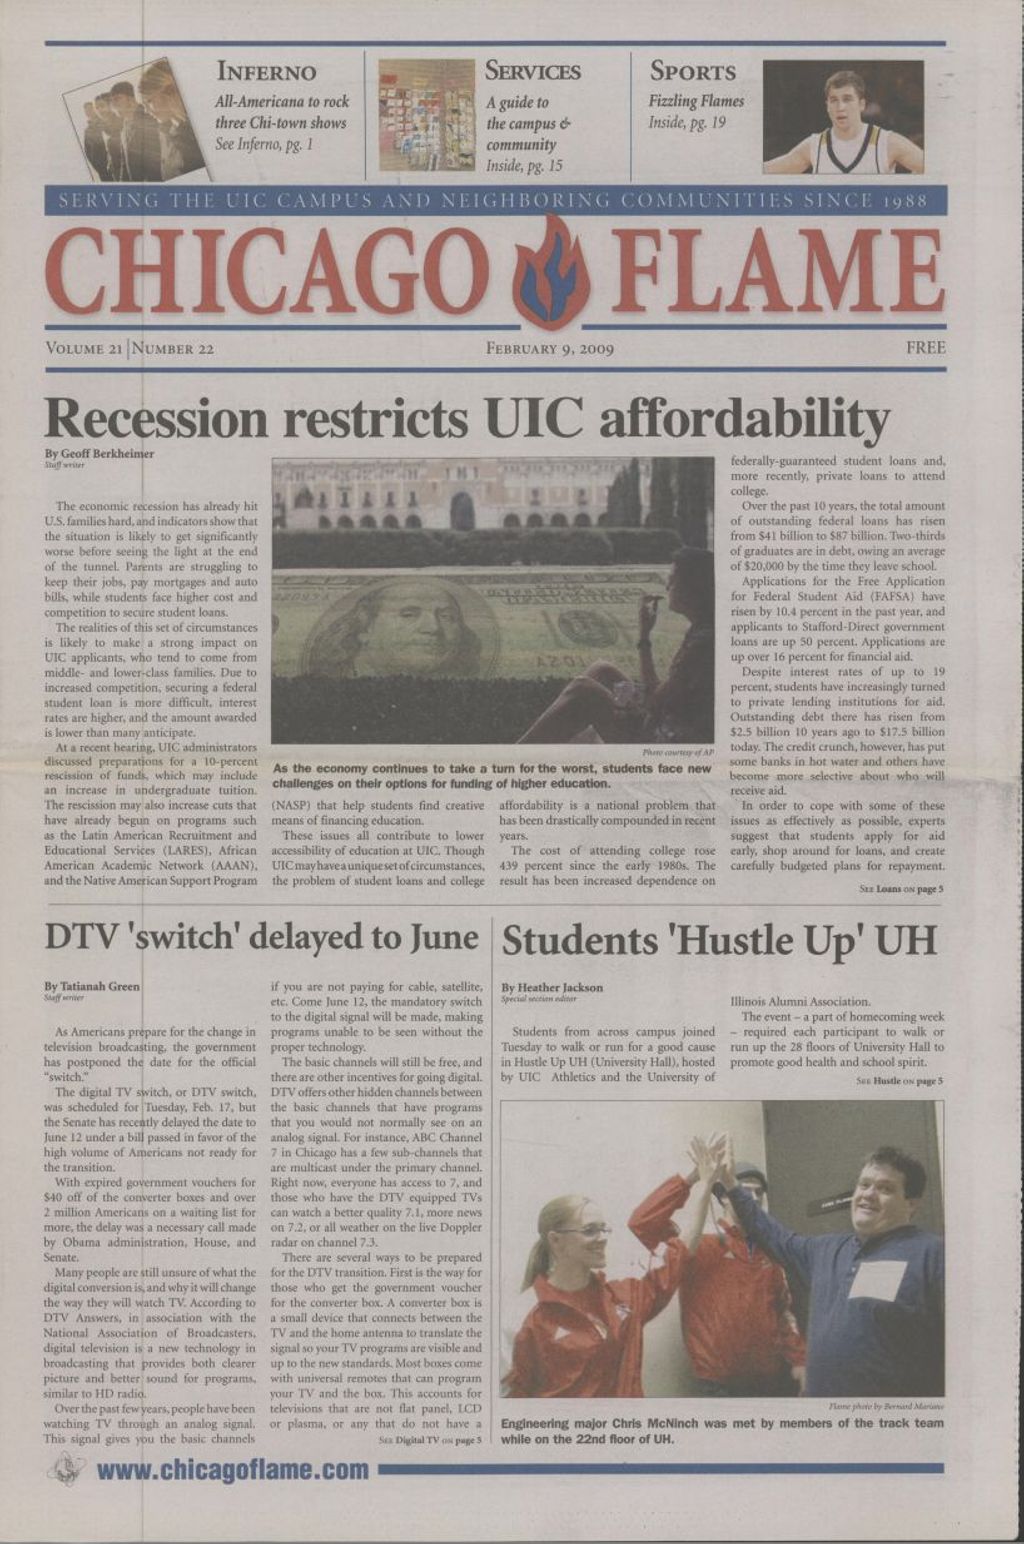 Chicago Flame (February 9, 2009)